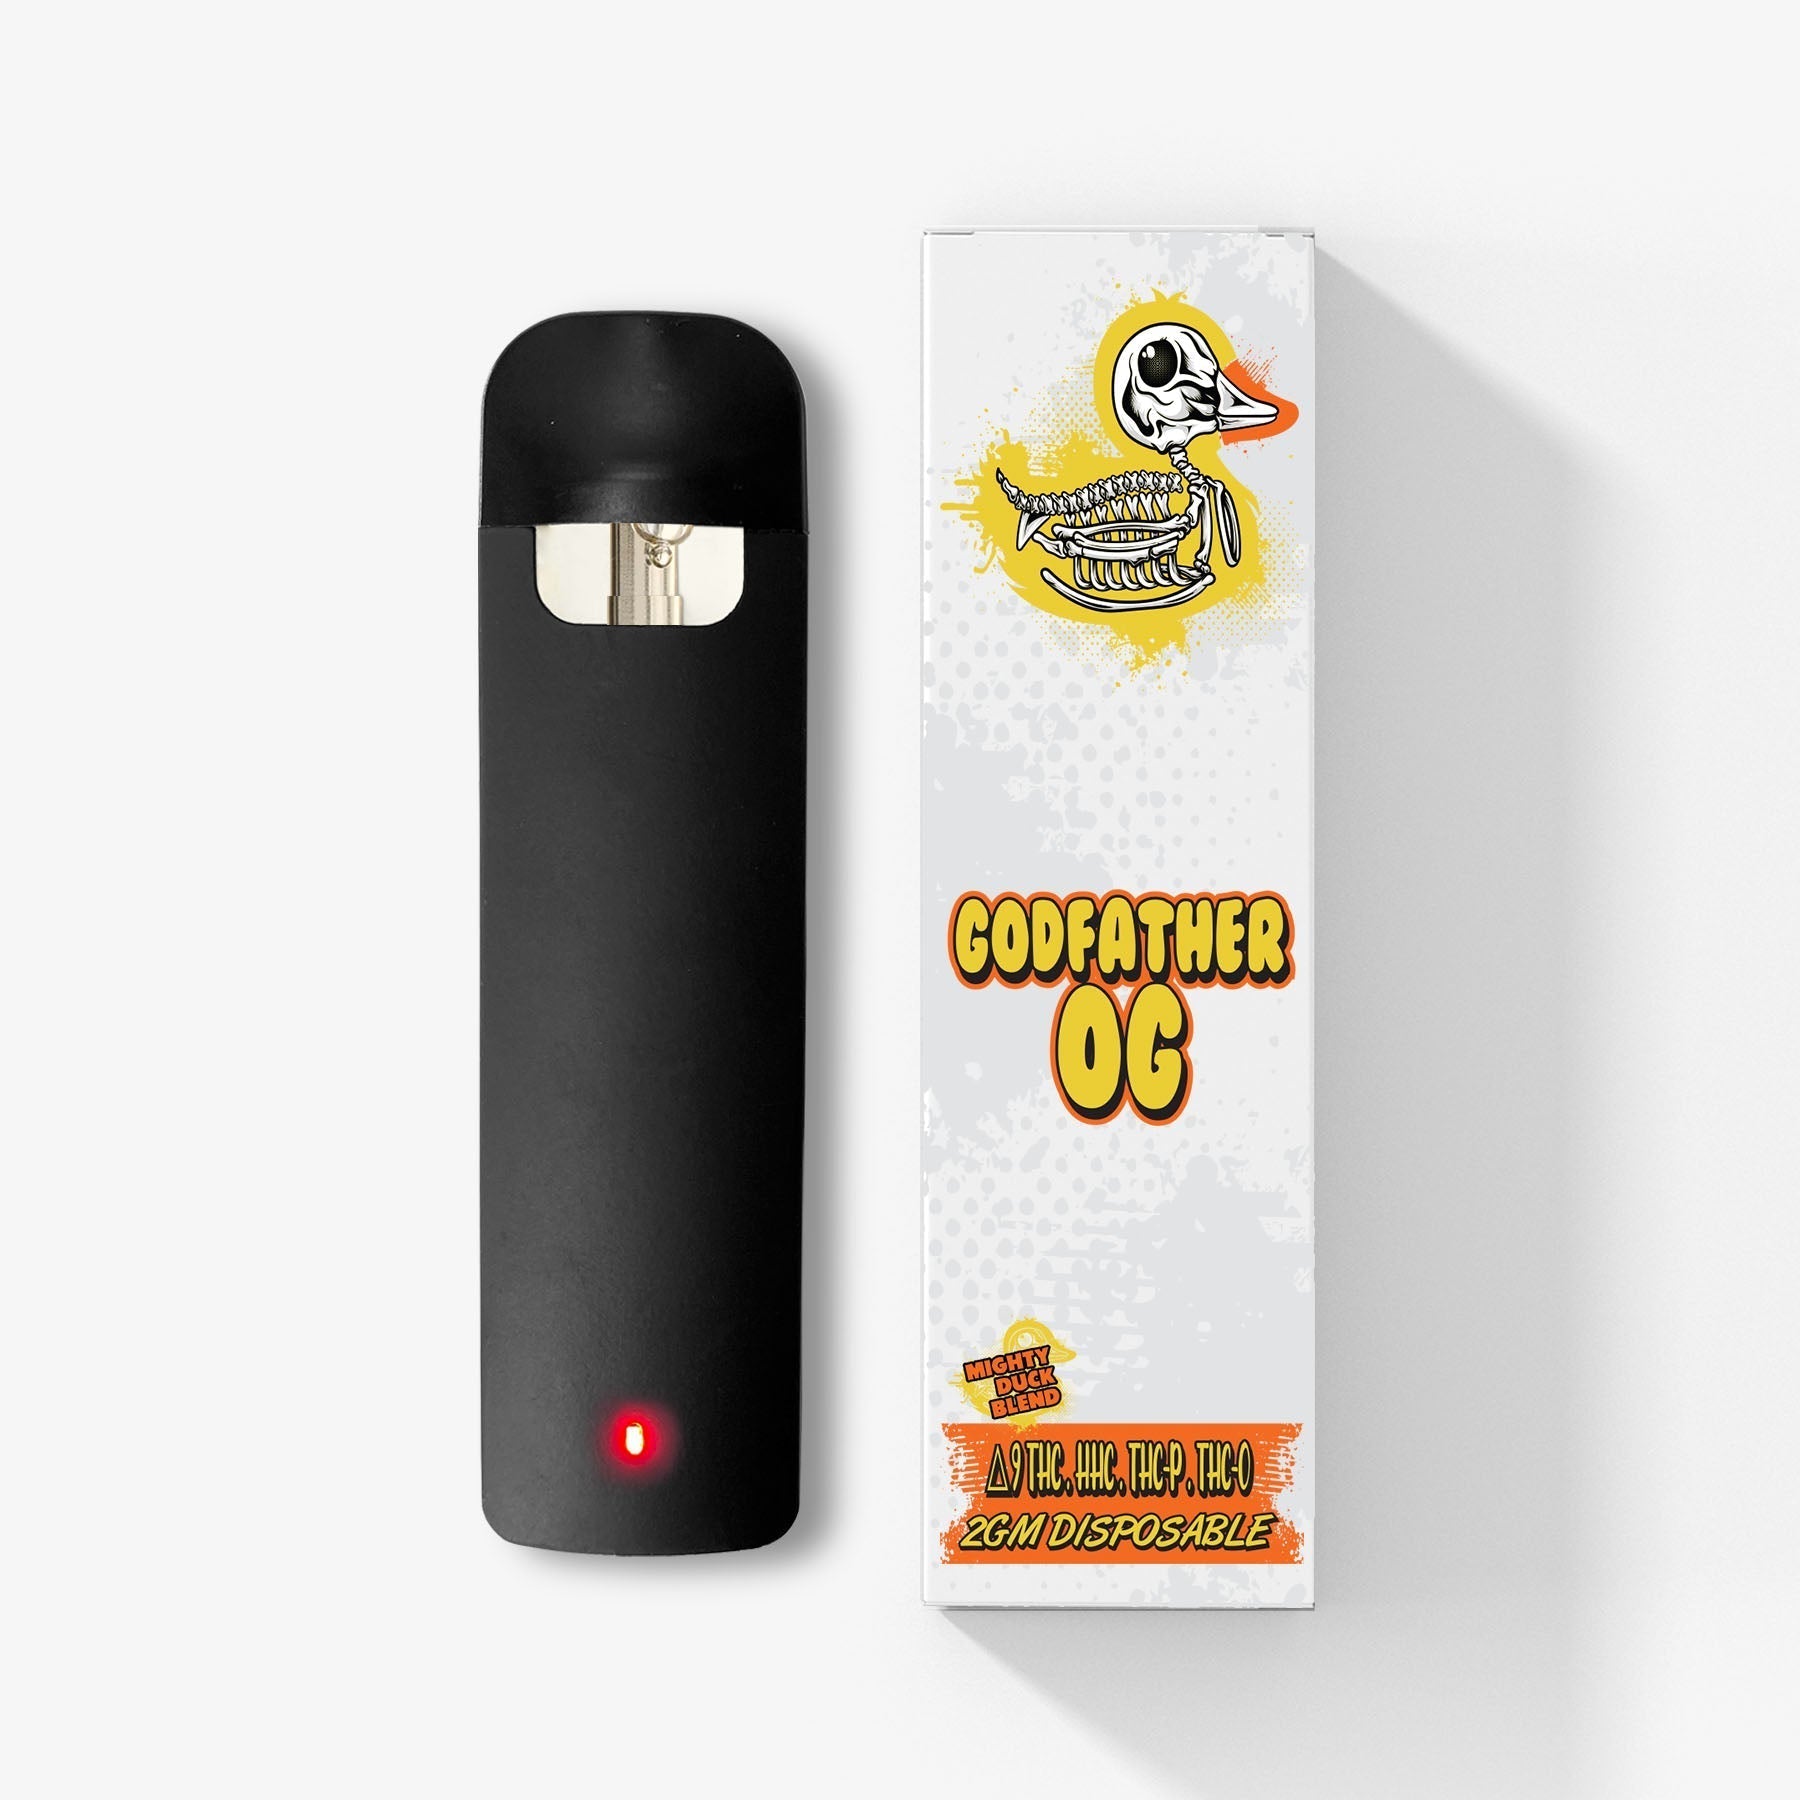 Rechargeable and Disposable HHC Vapes 2 Gram